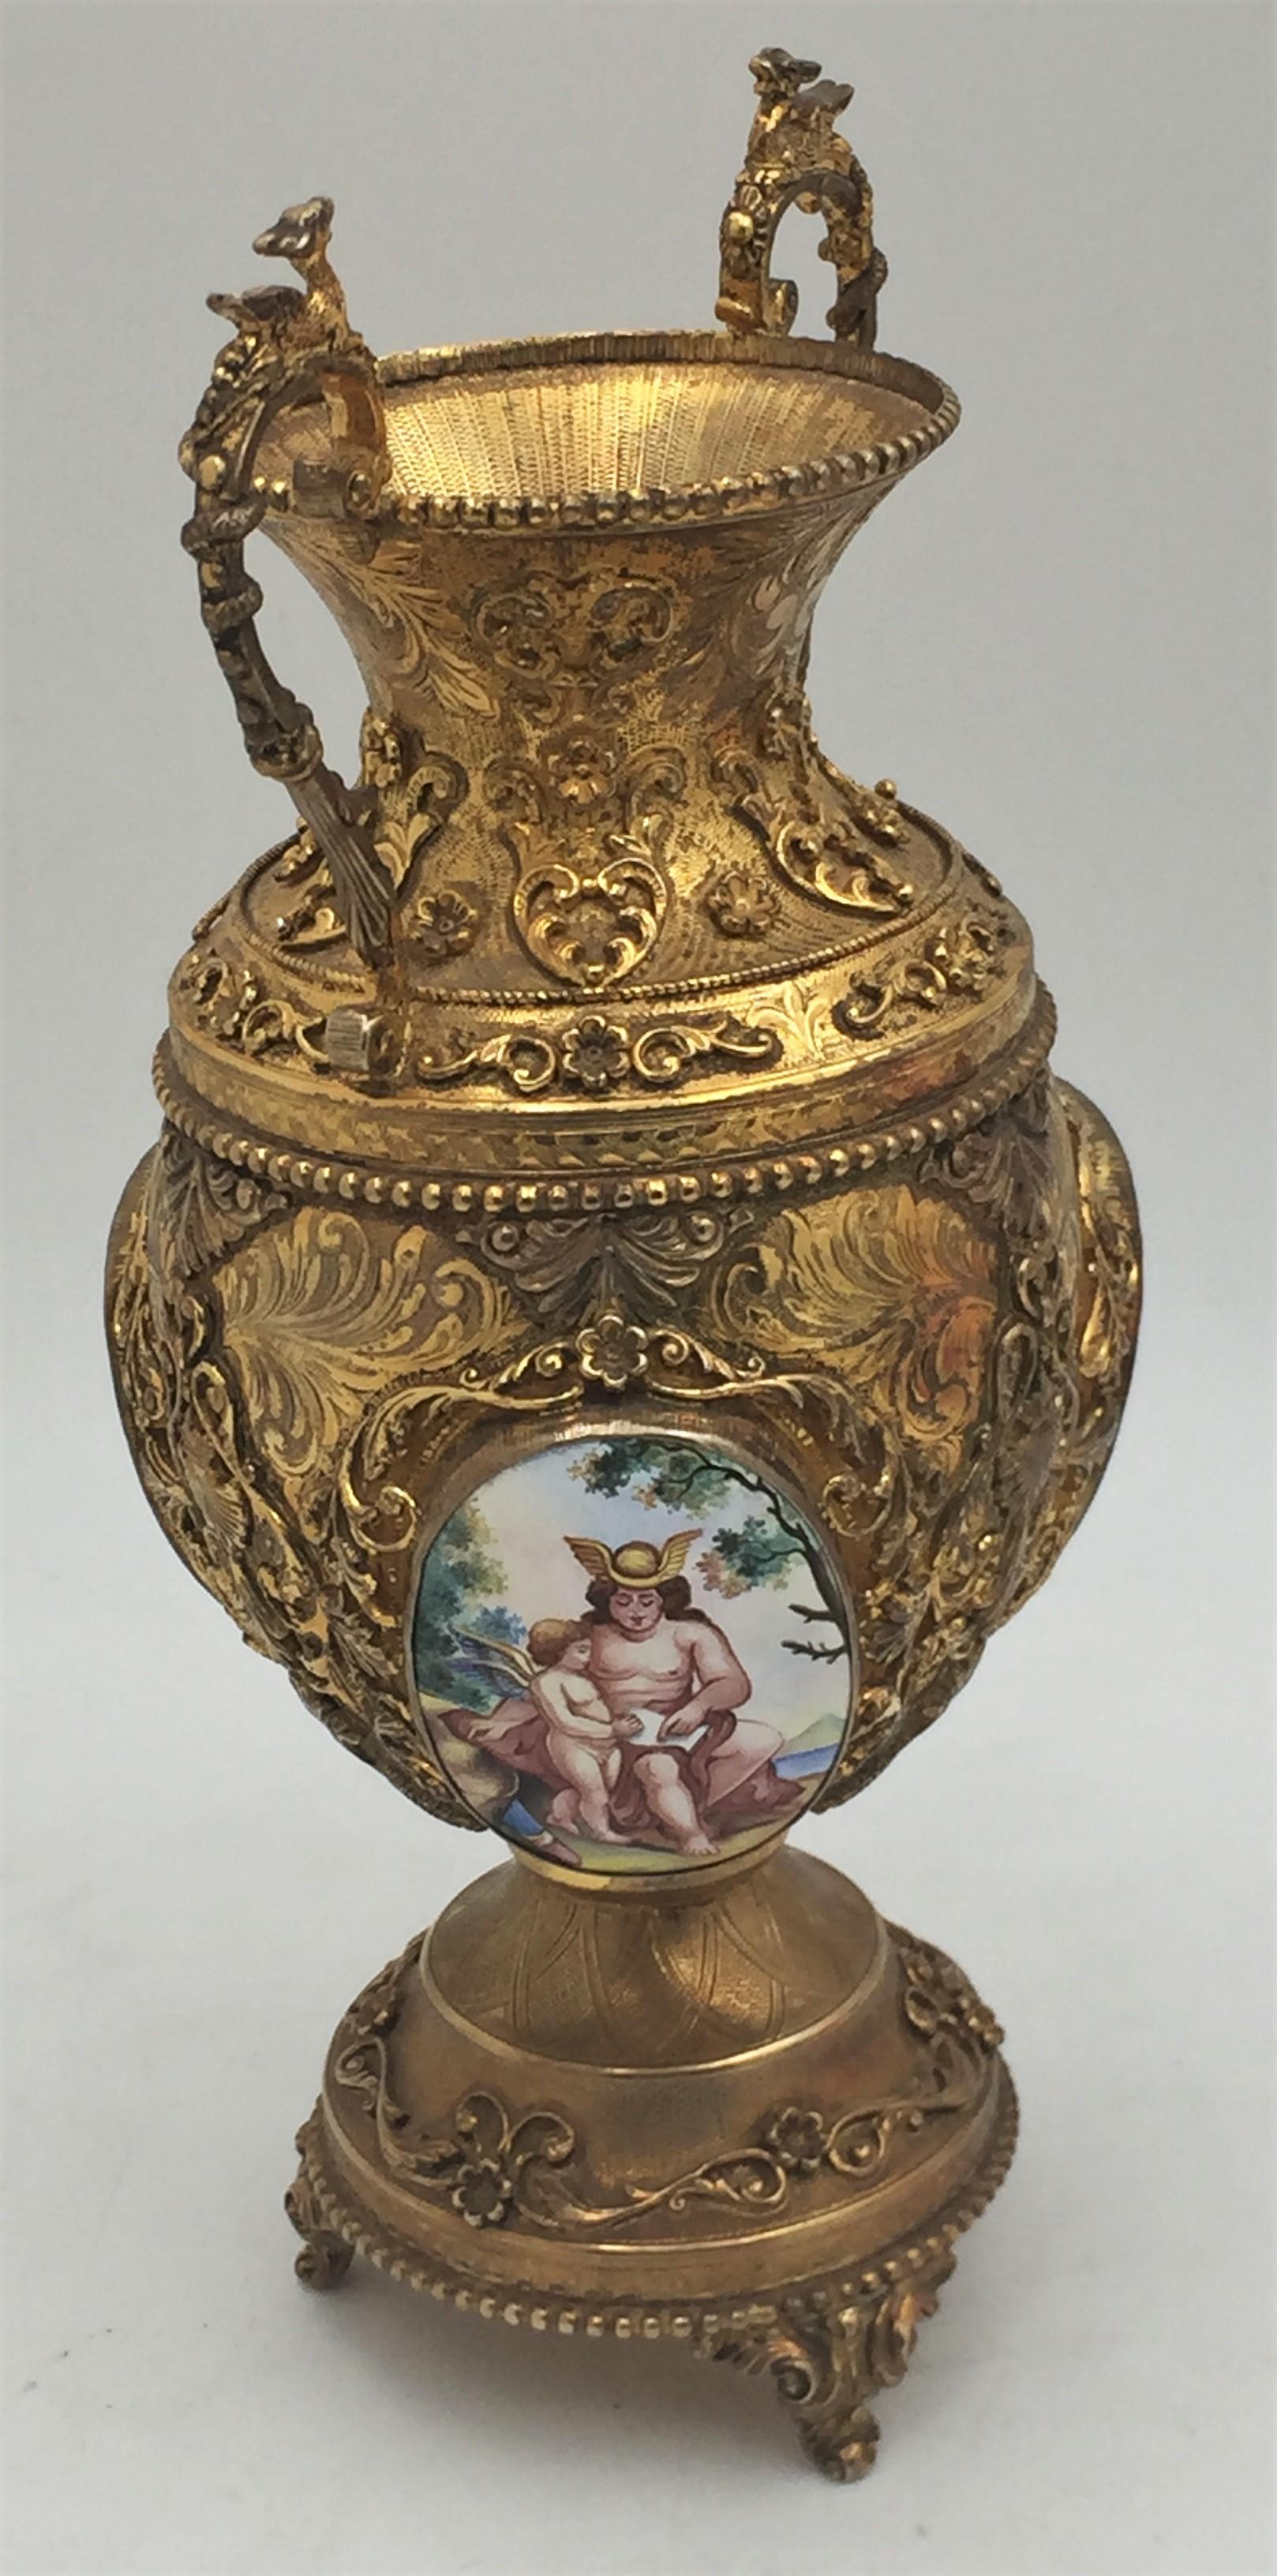 Italian, gilt sterling silver vase, highly decorative with enameled plaques, standing on 4 feet, with swirling ornaments across the body and base, in Buccellati style. It measures 9 1/2'' in height by 4 1/2'' in depth at the widest point, weighs